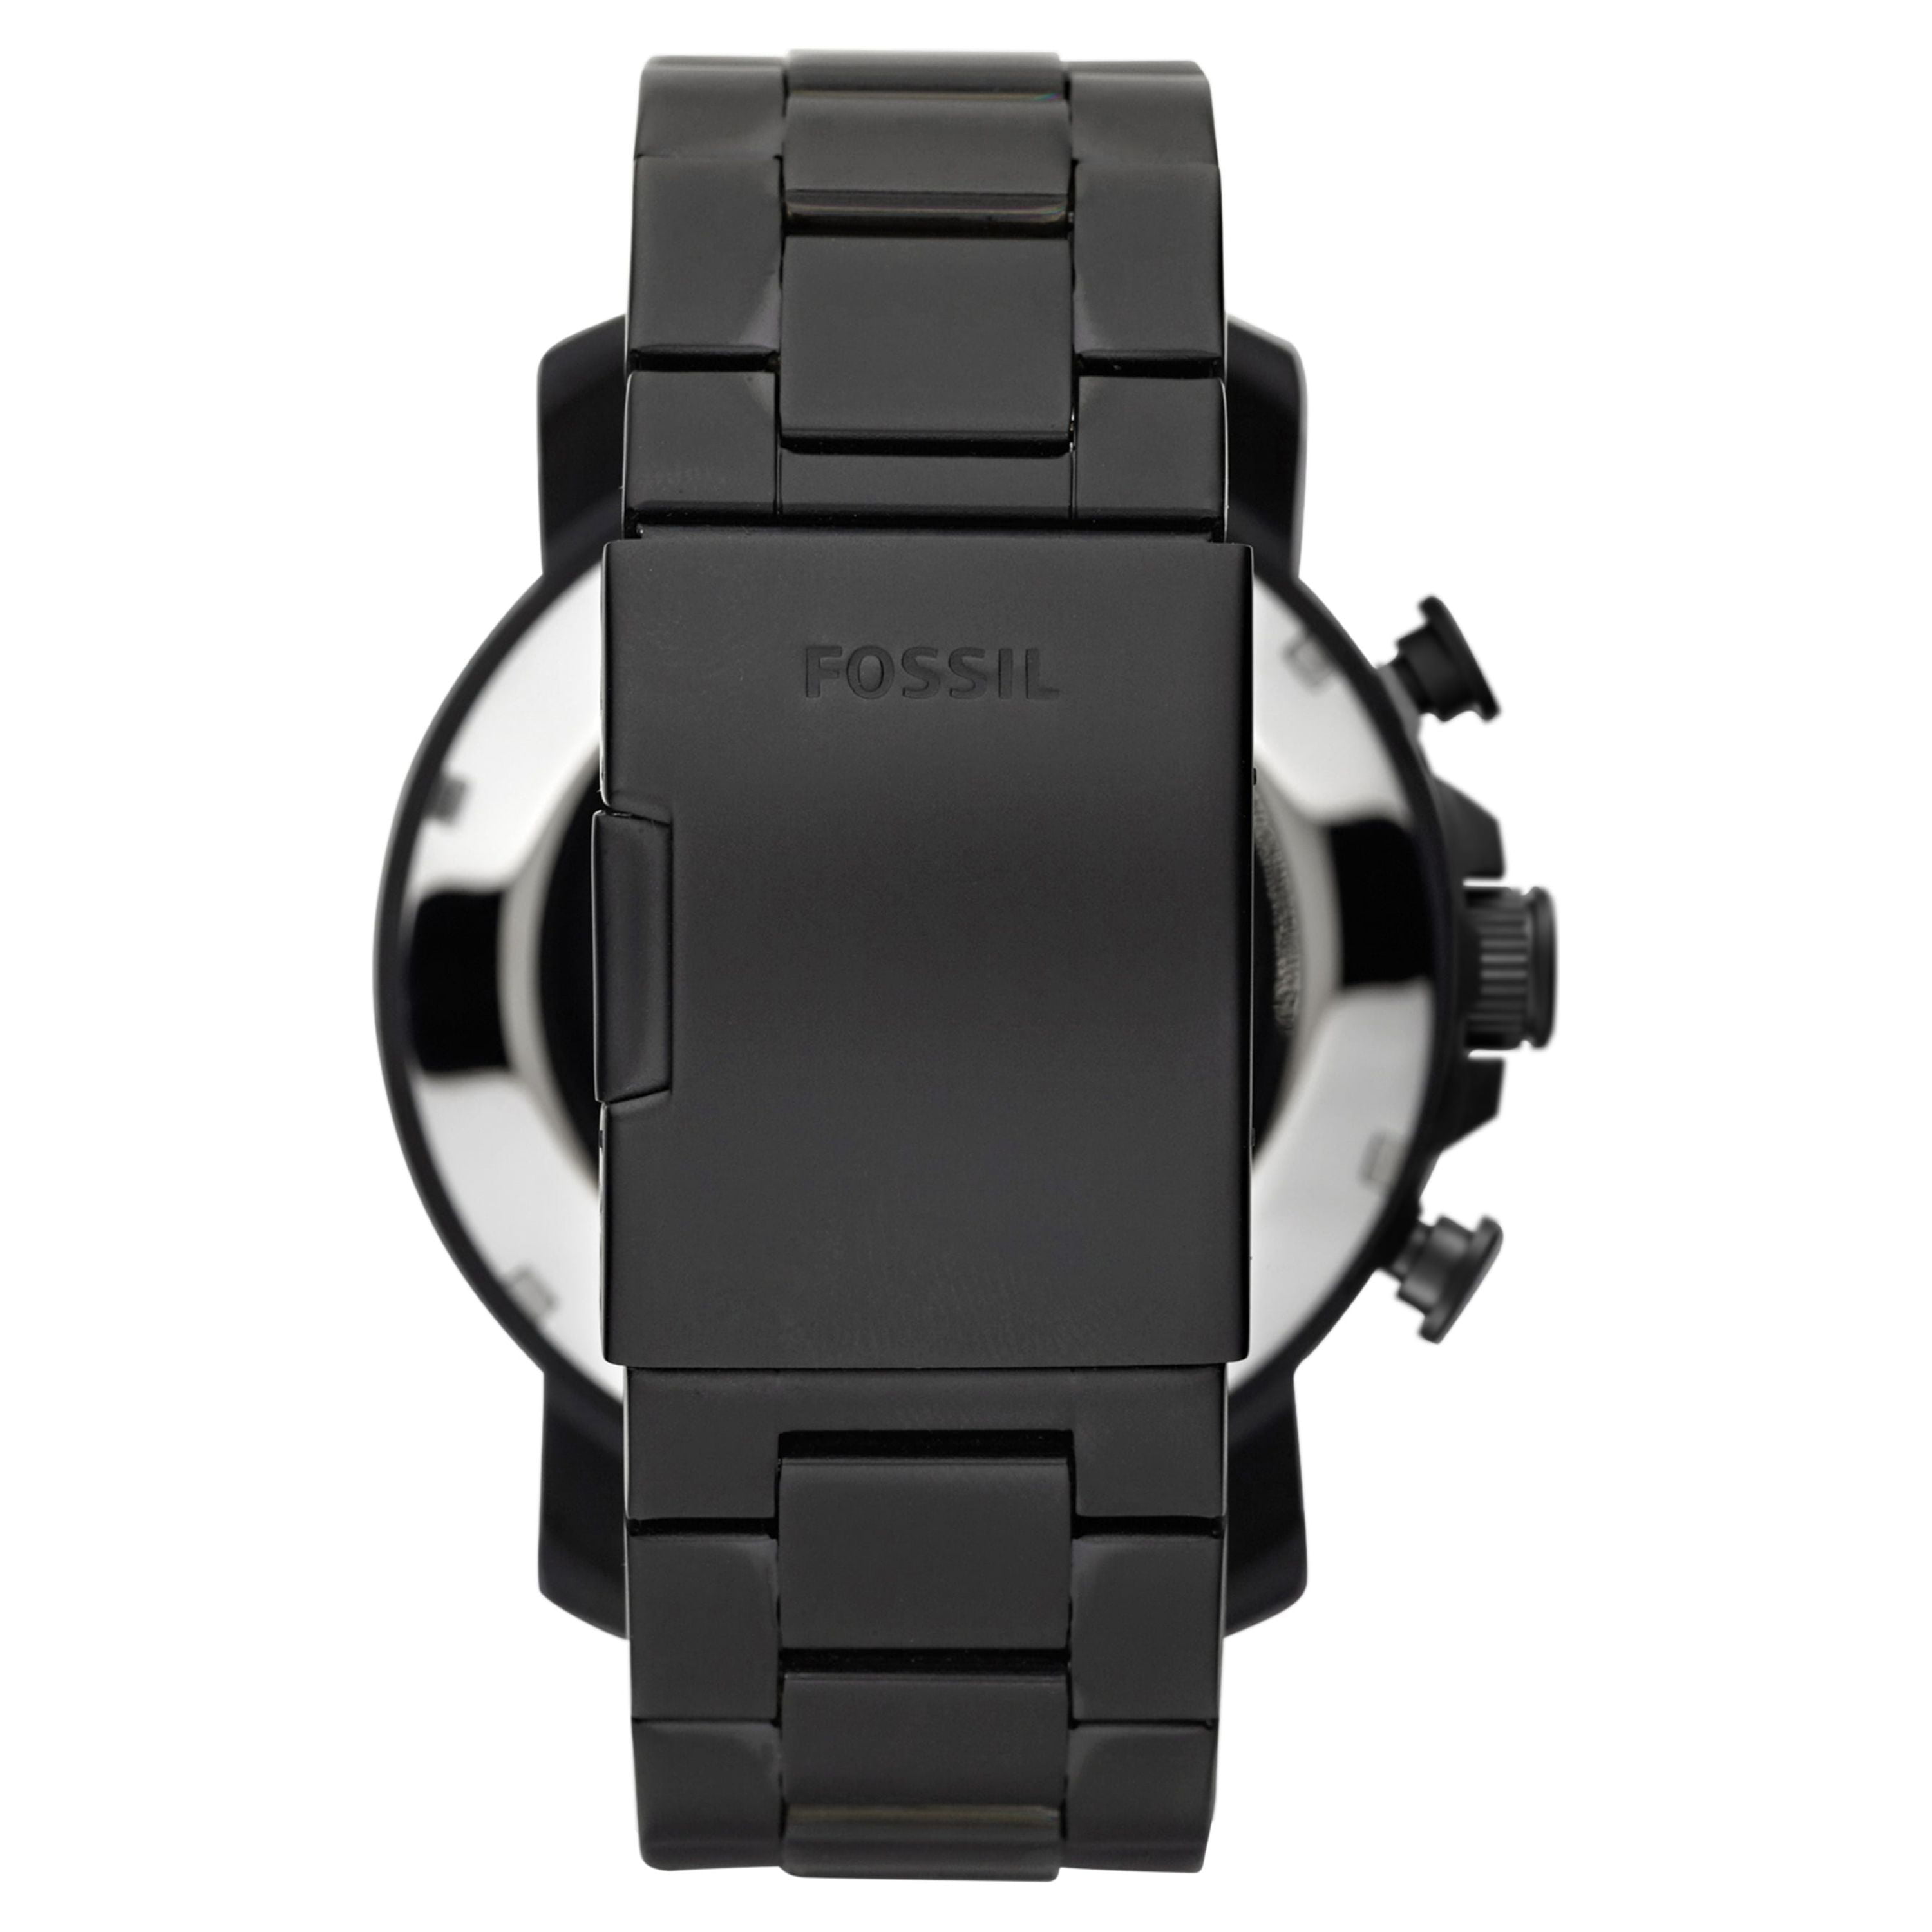 Fossil Men's Nate Chronograph Black Stainless Steel Watch(Style: JR1356)